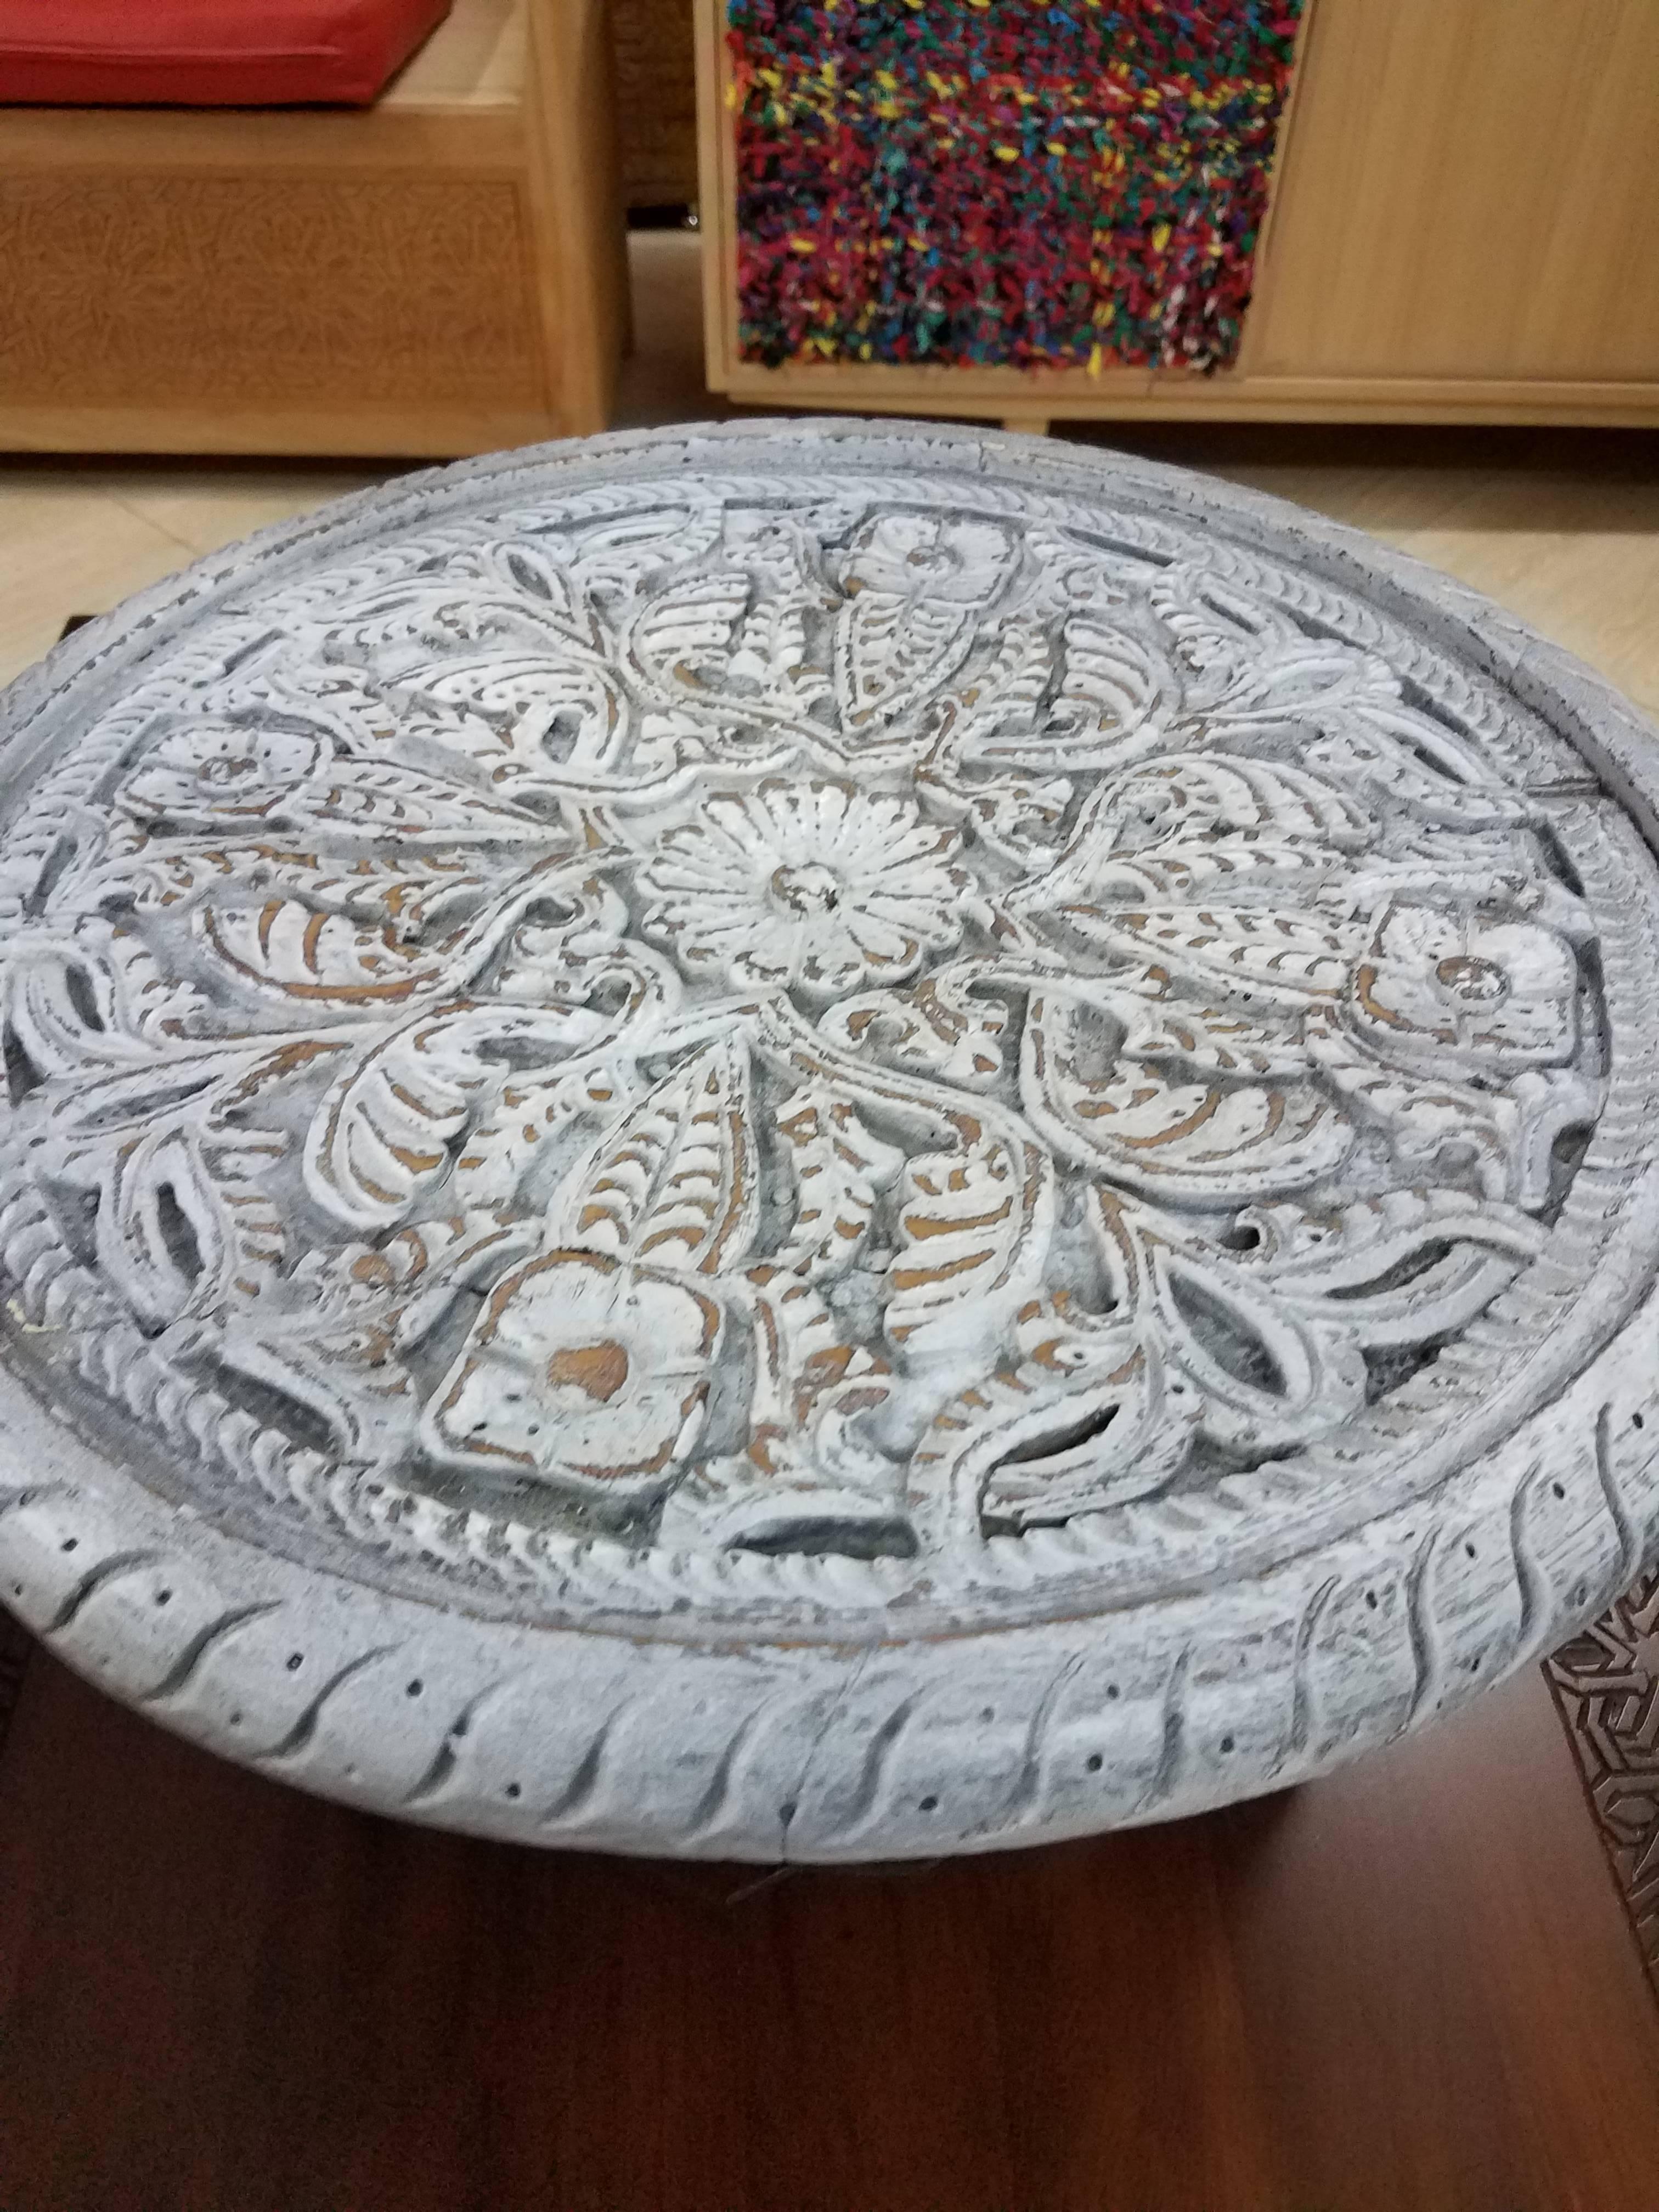 Rare find ! 100% hand-painted Moroccan round shape side table. Great handcraftsmanship throughout. Beautiful add-on to your décor. This table measures approximately 12